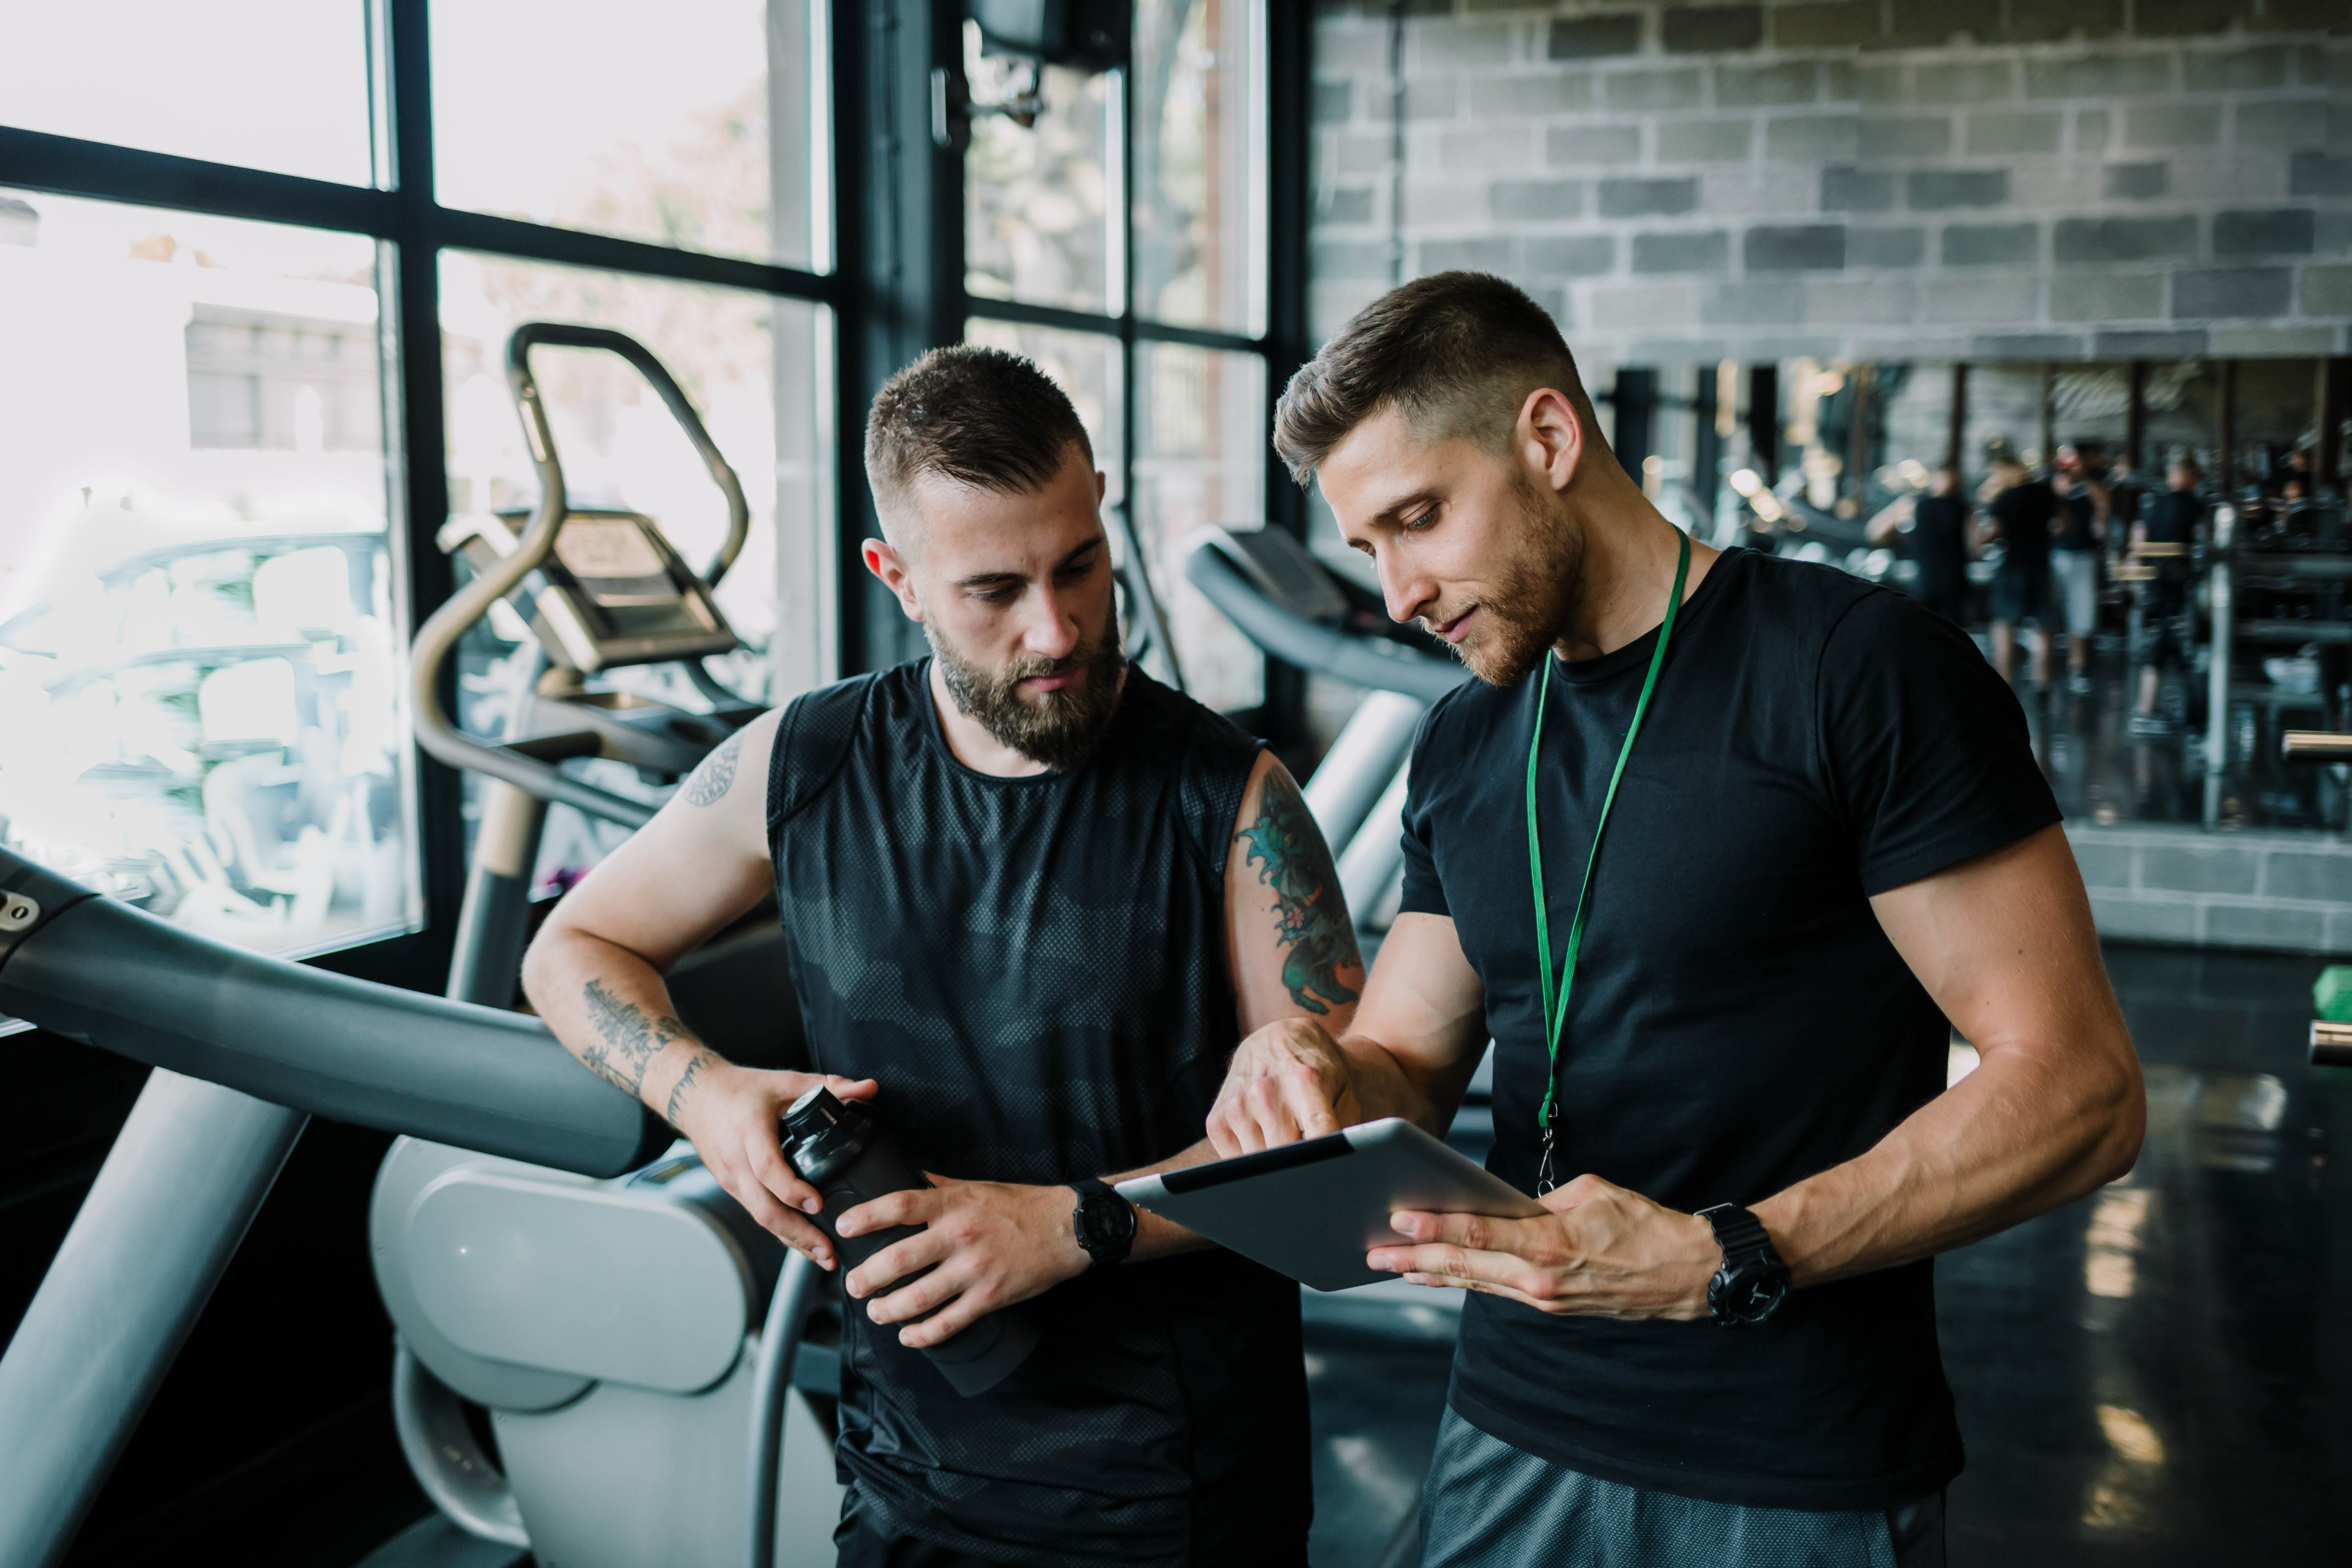 Male trainer meets with young, male client to discuss over a tablet in the gym